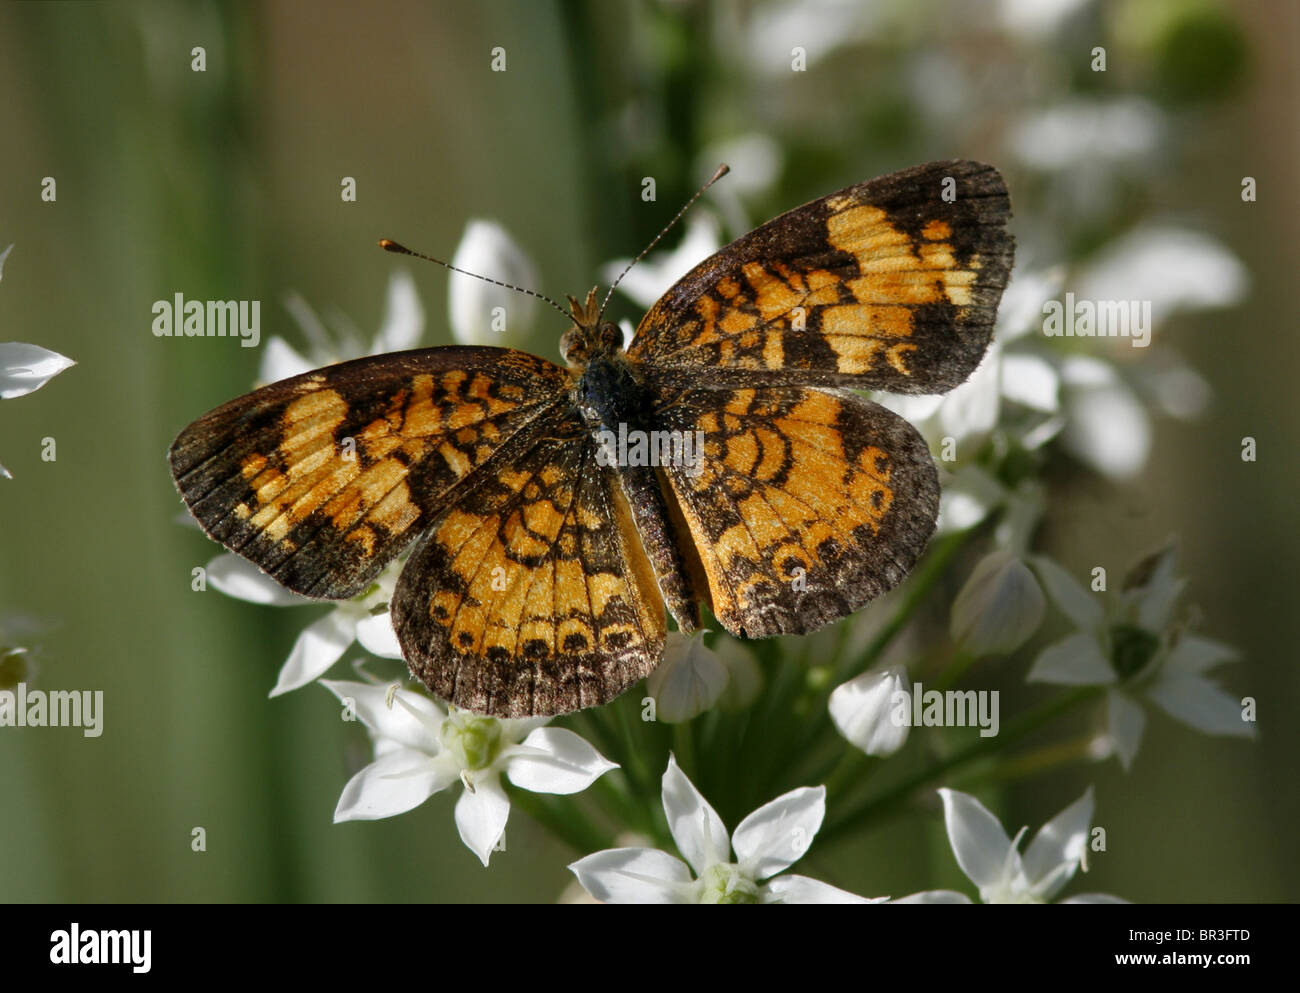 Pearl crescent butterfly Foto Stock